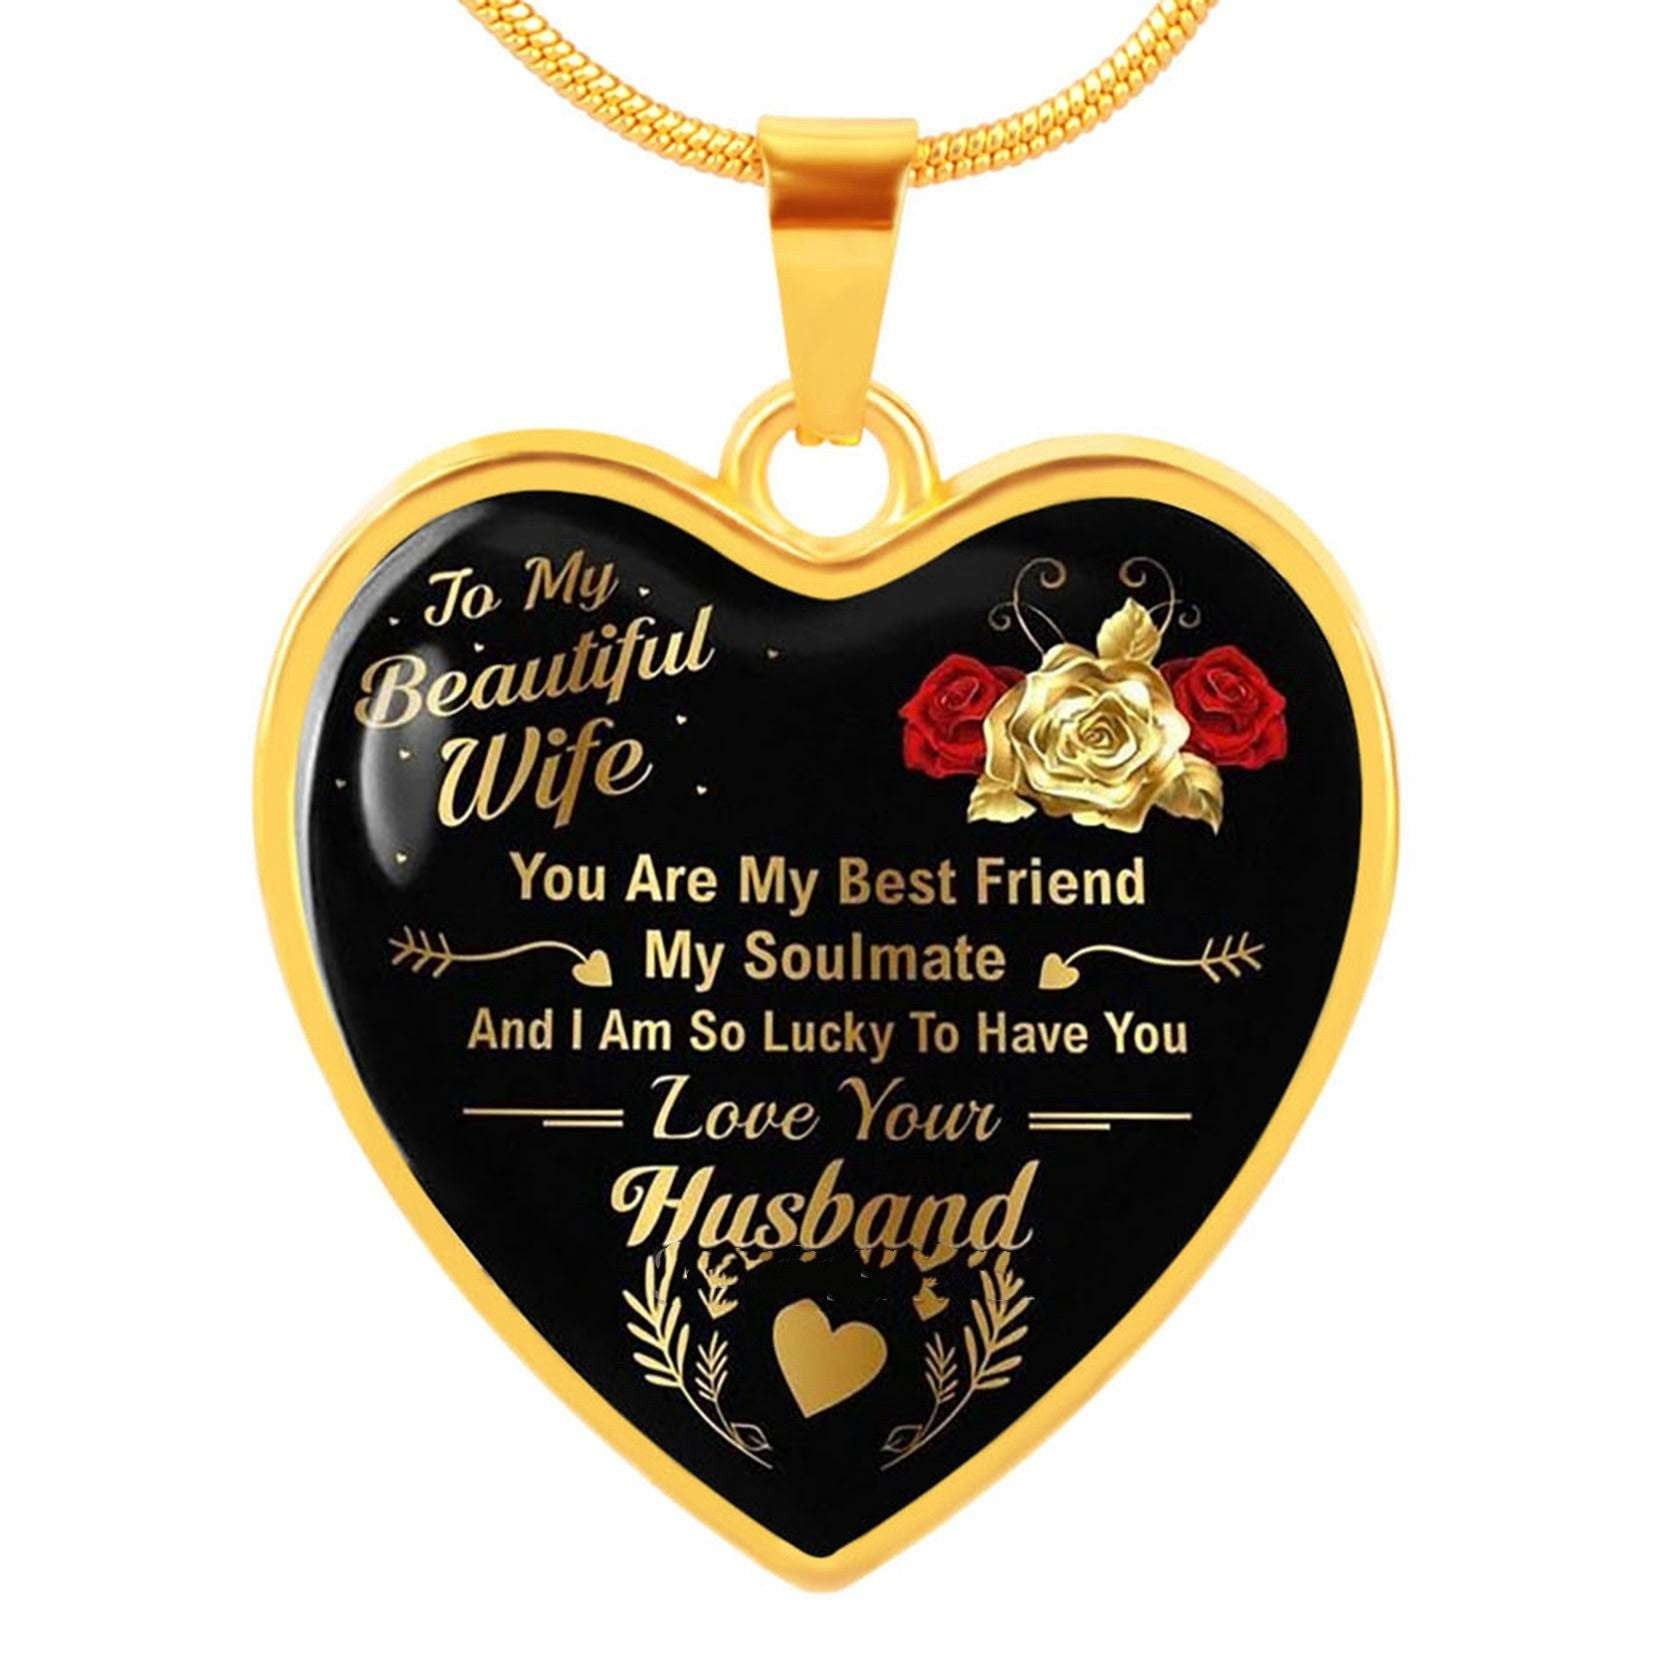 Couples' Gift Necklace, Romantic Love Pendant, Sentimental Jewelry Gift - available at Sparq Mart